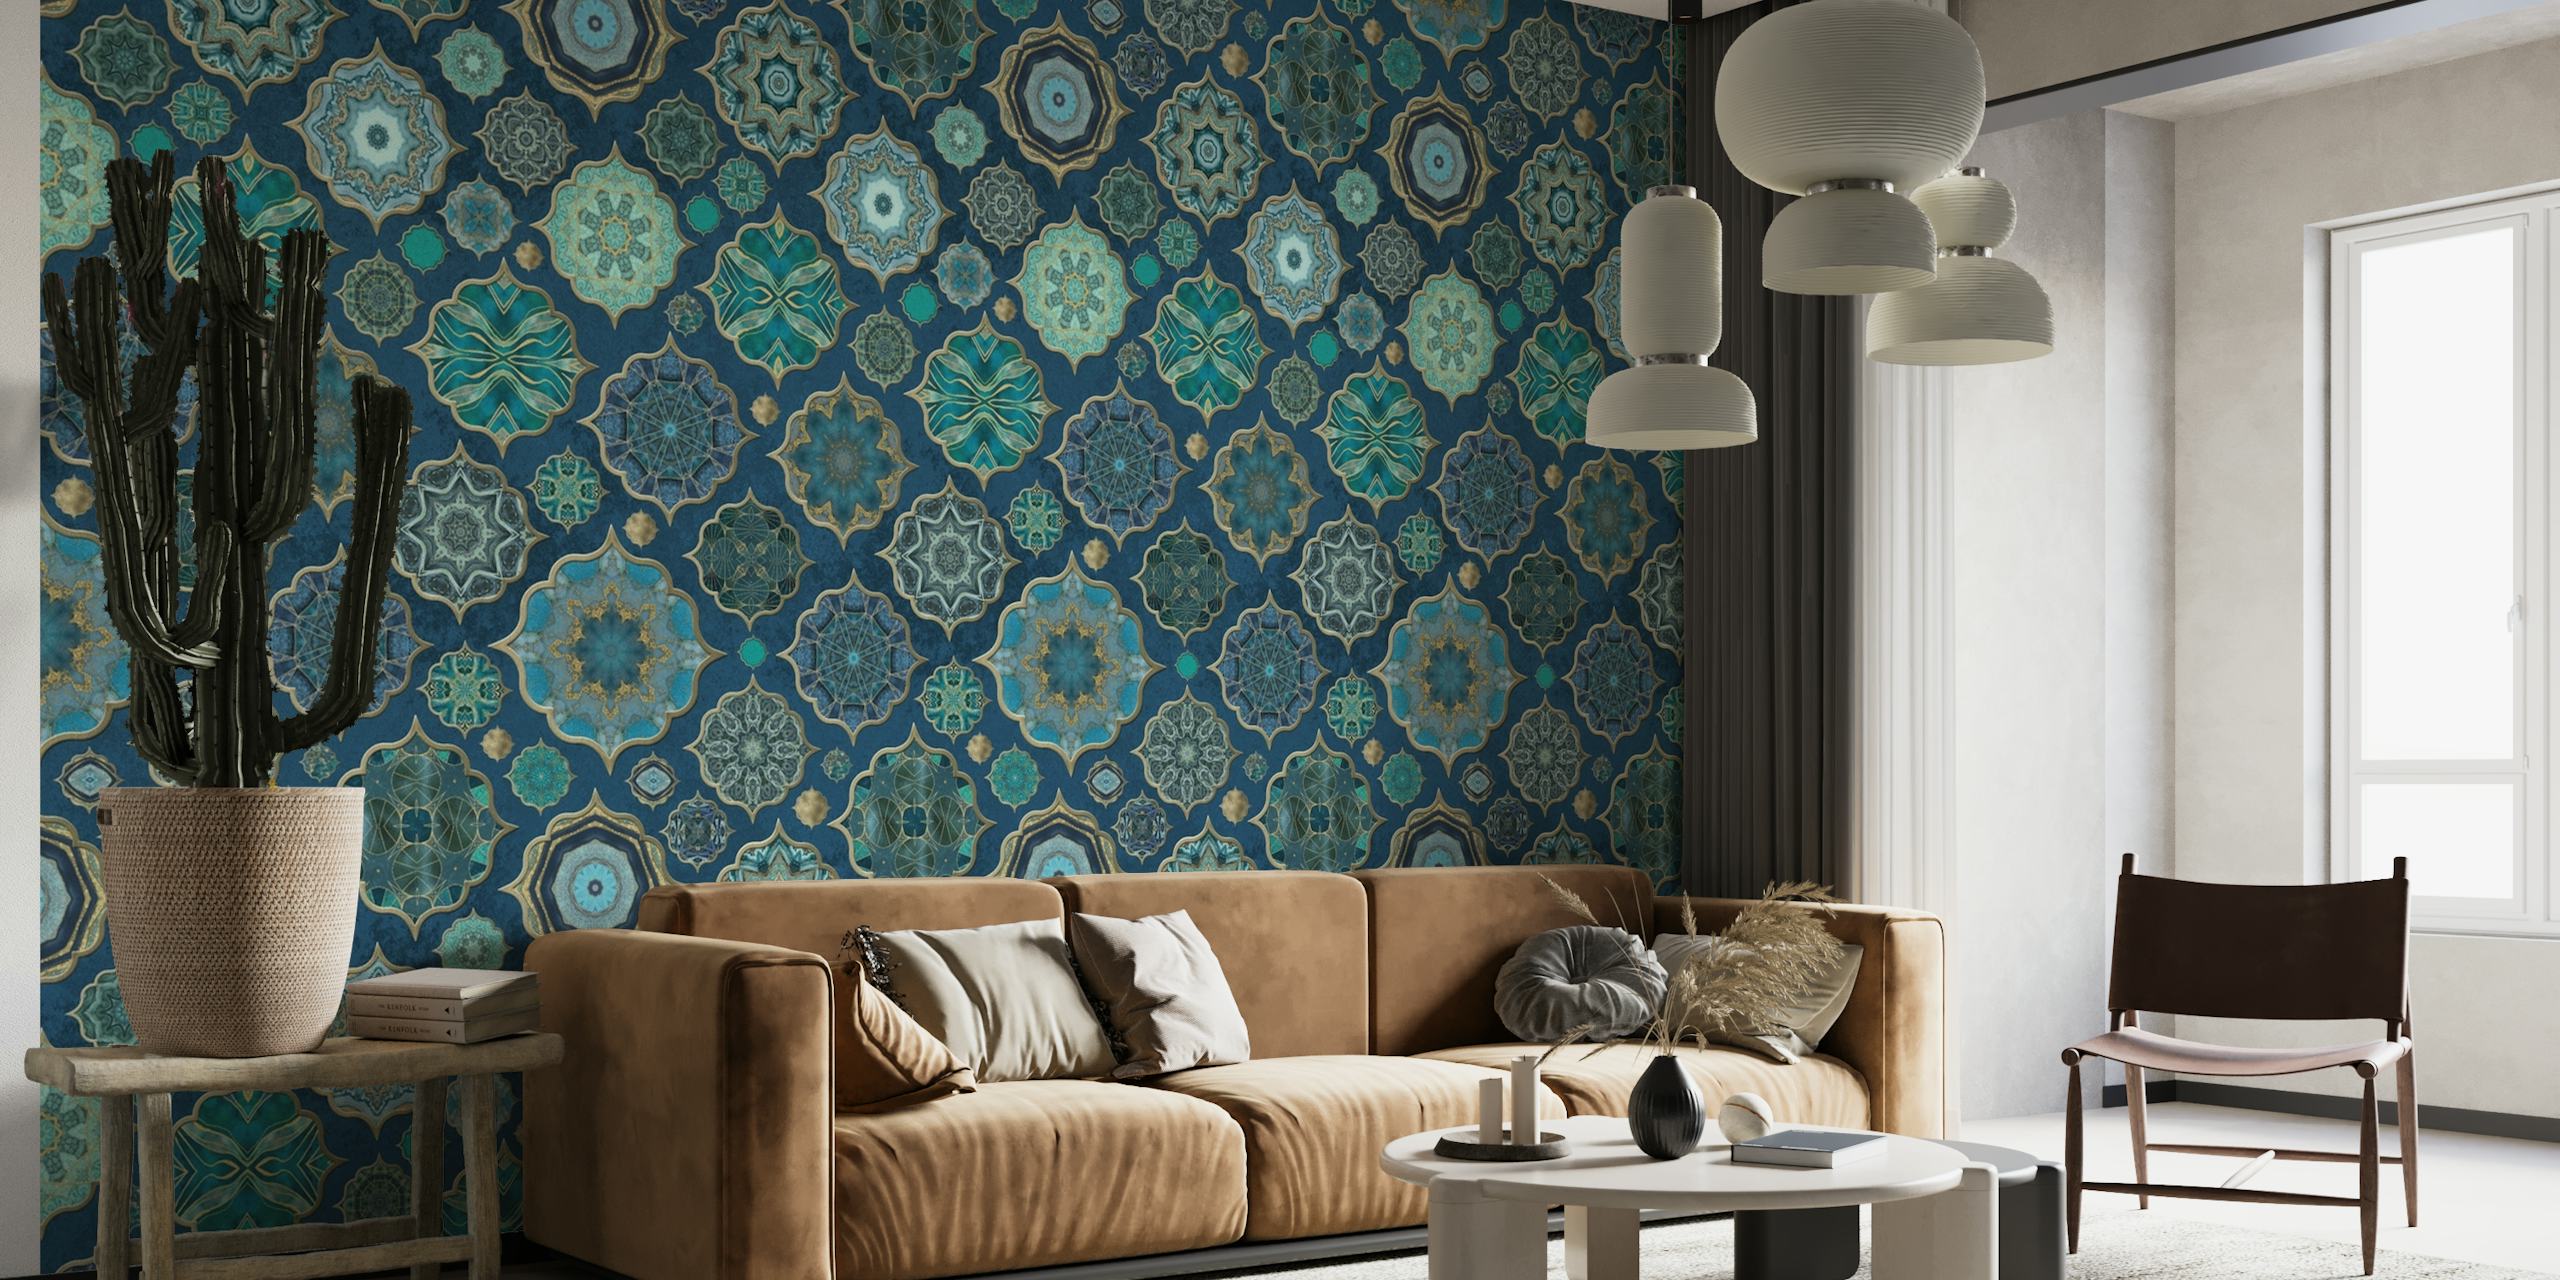 Moroccan Tiles Teal Luxury tapete